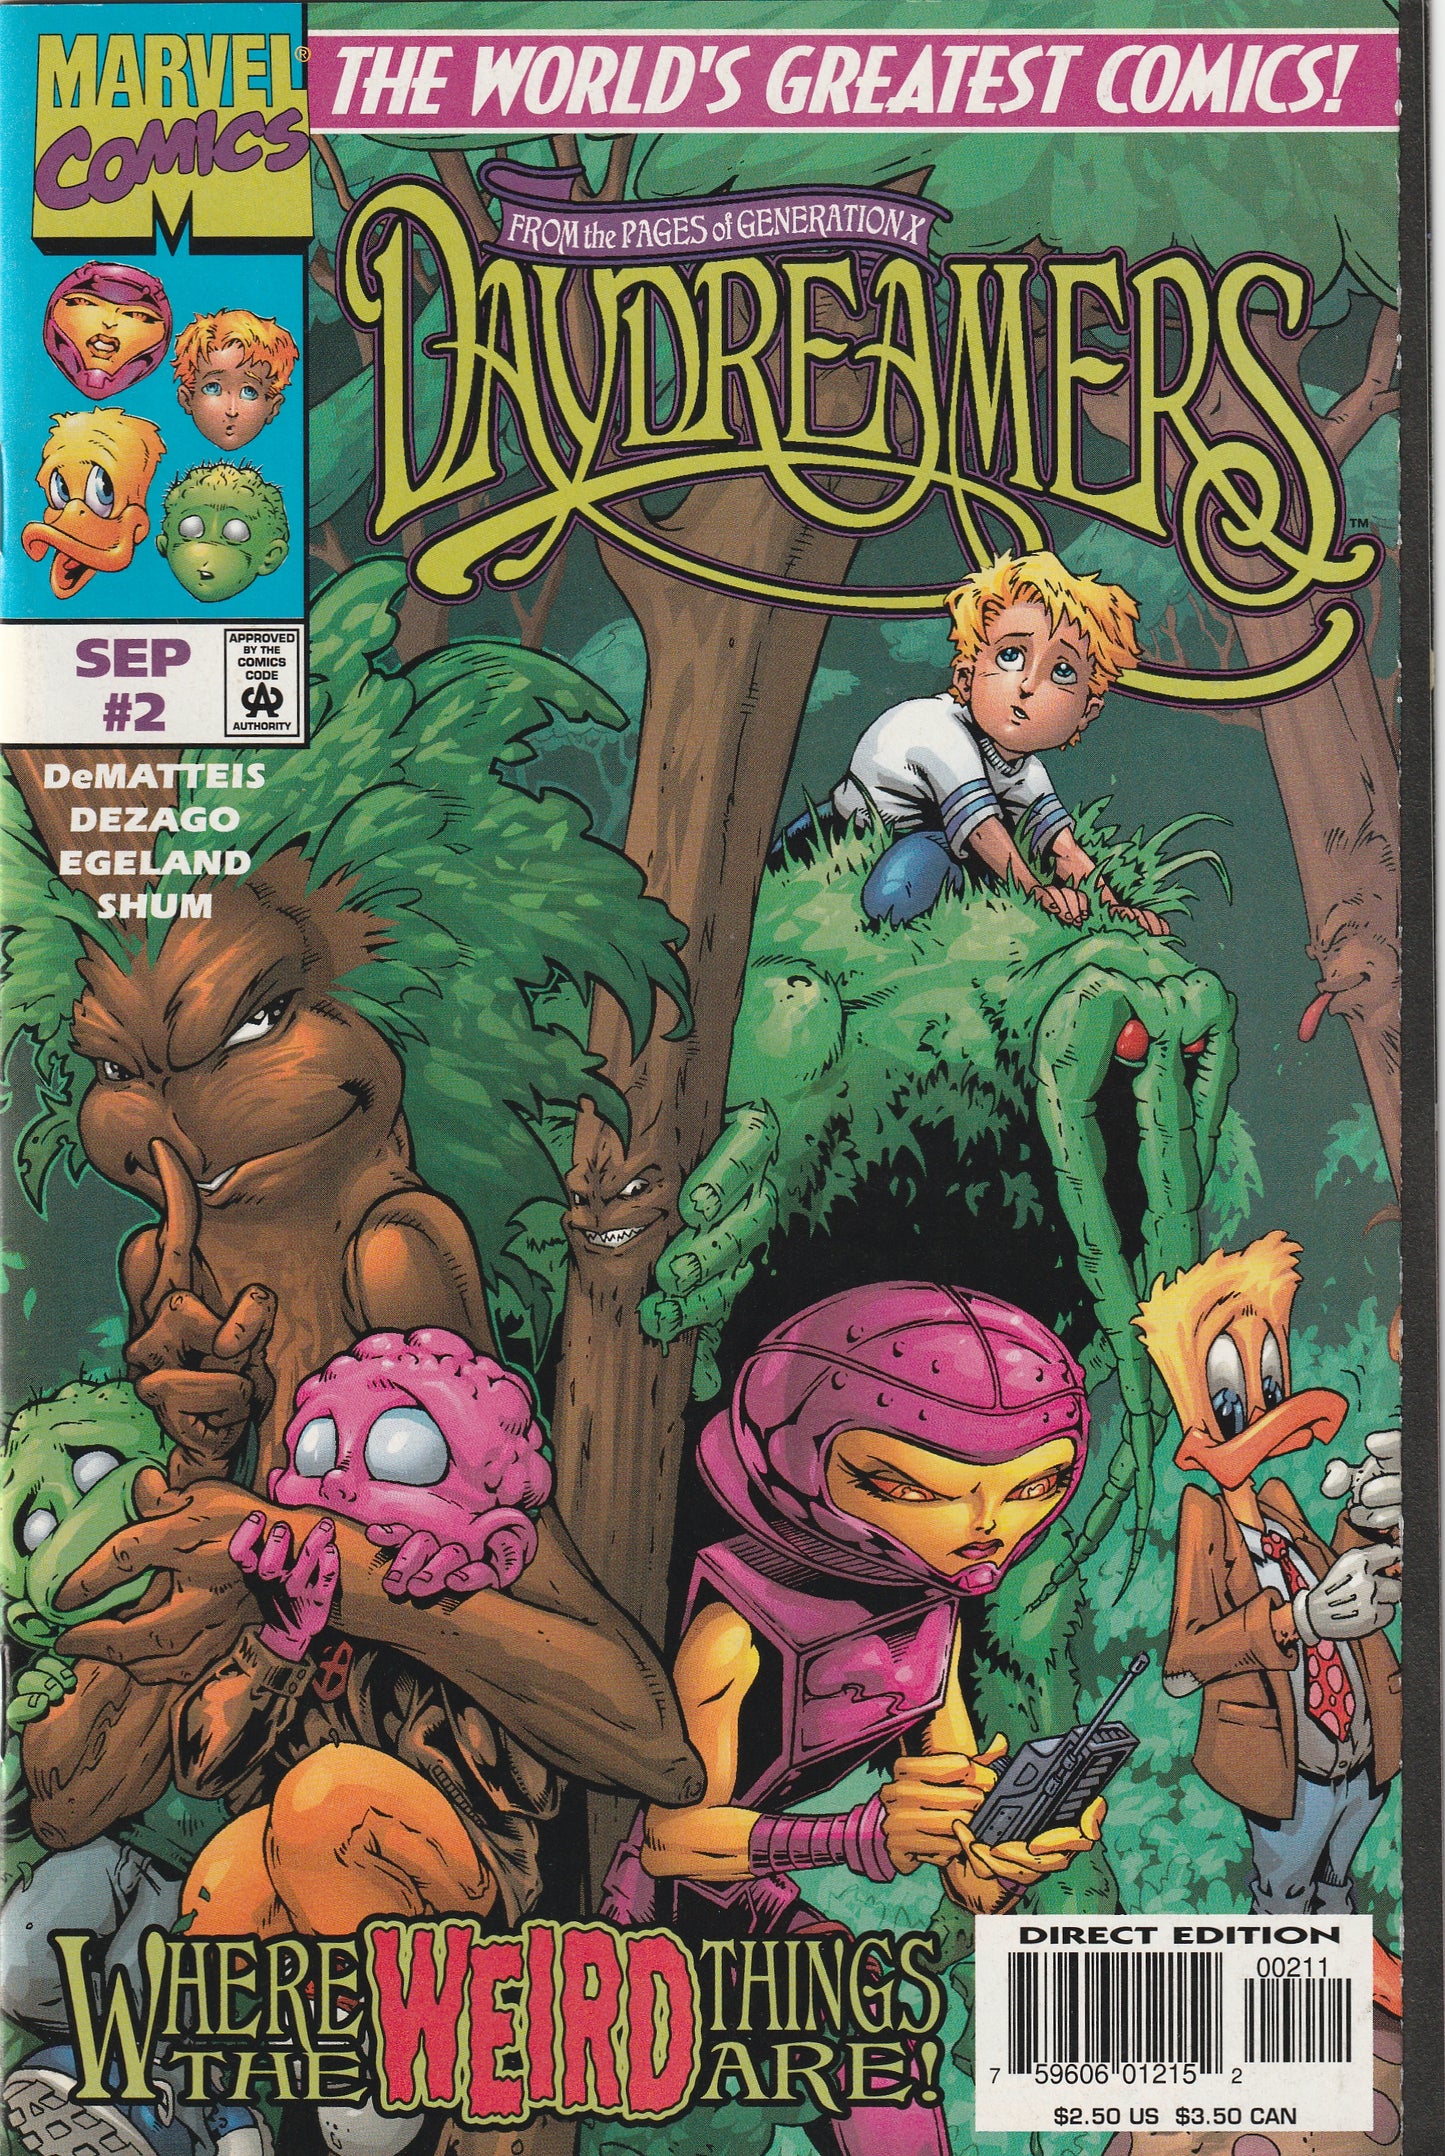 The Daydreamers (1997) - 3 issue mini series